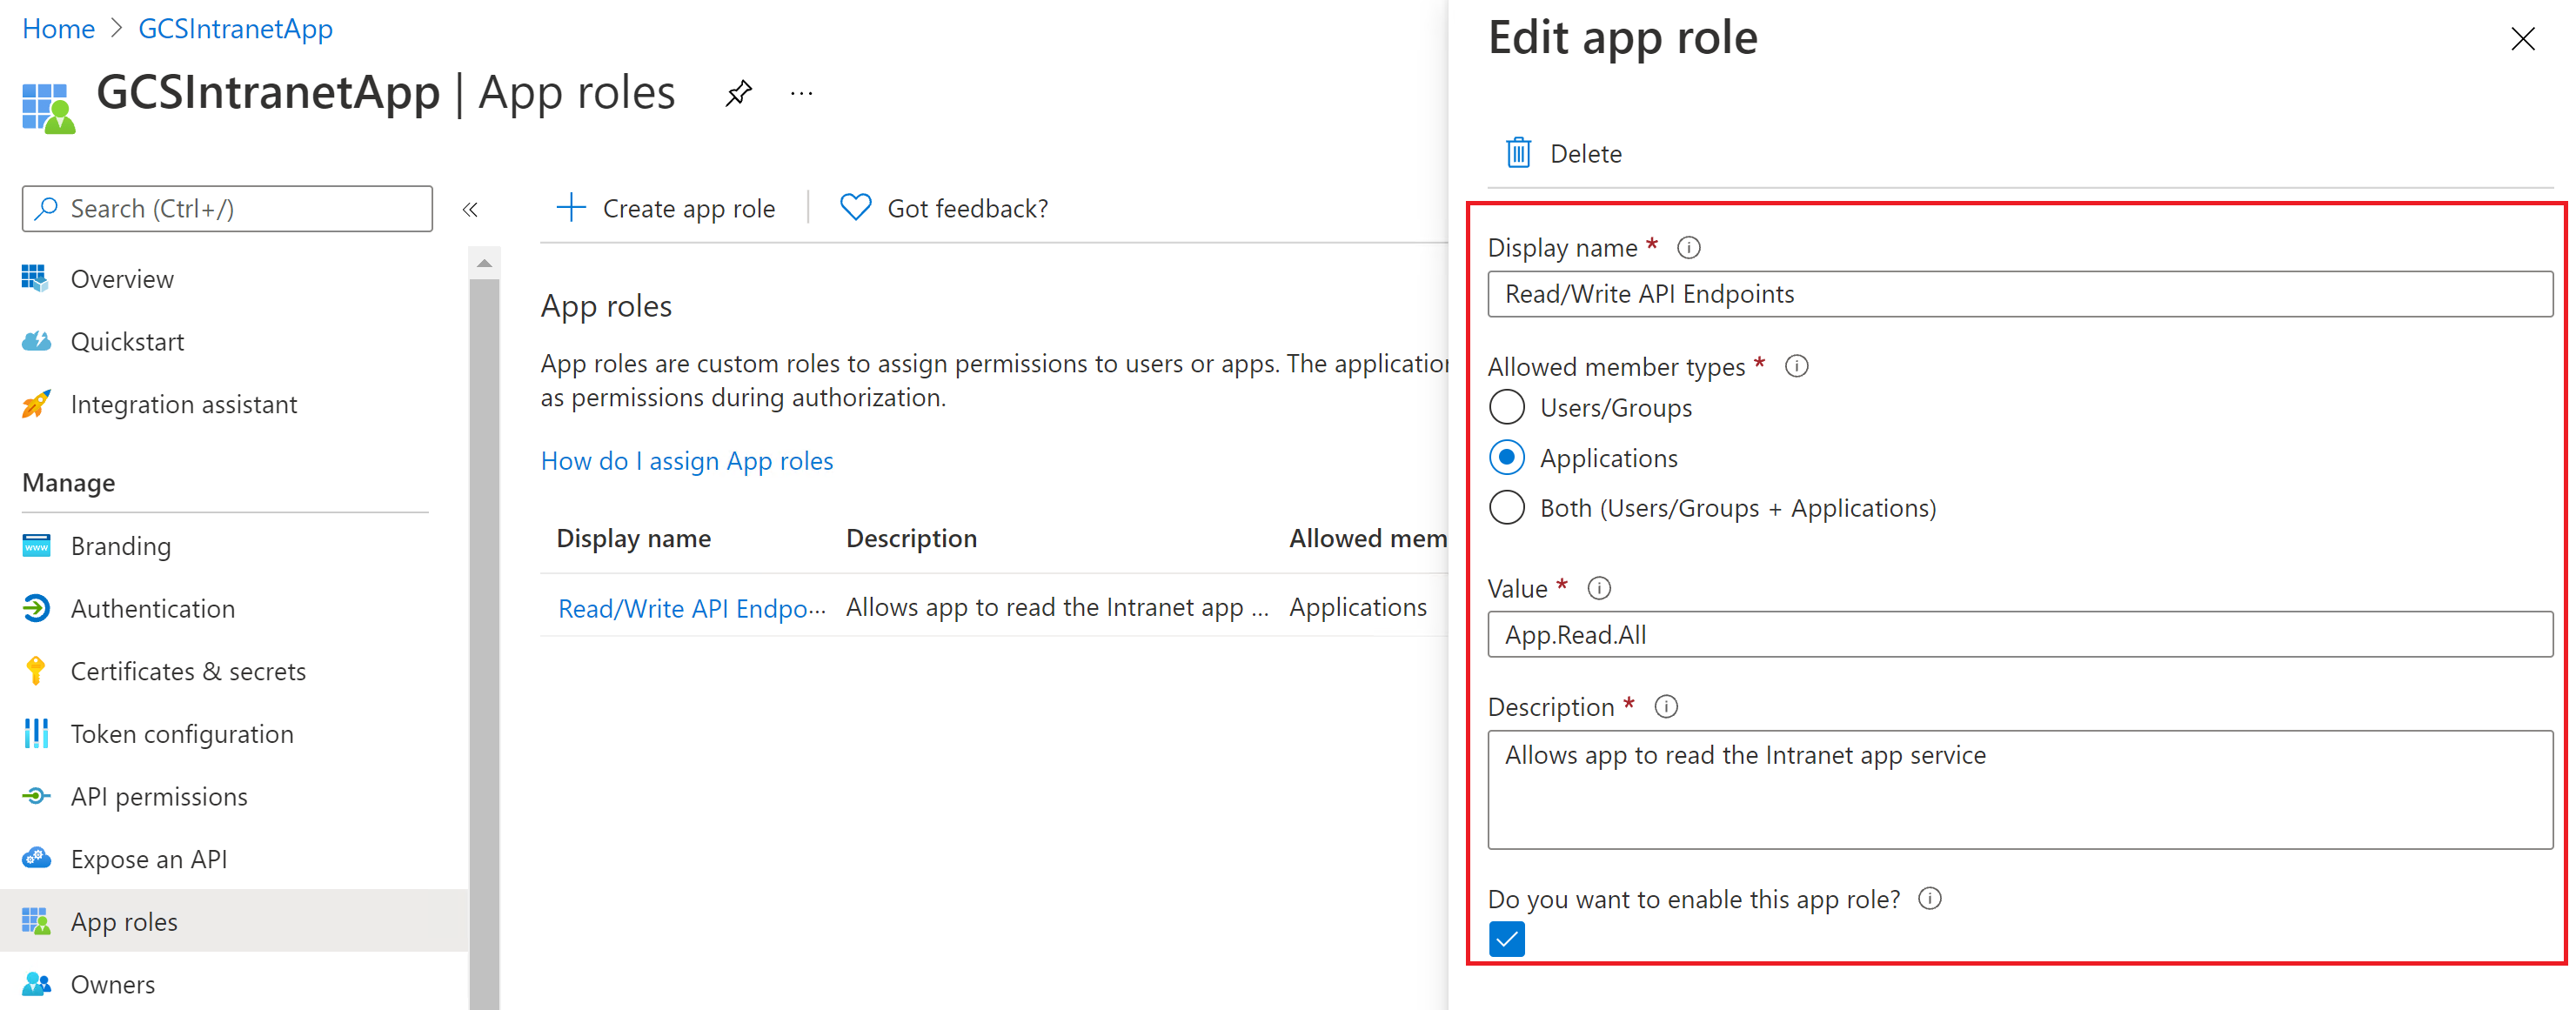 Image showing the section to edit an app role.